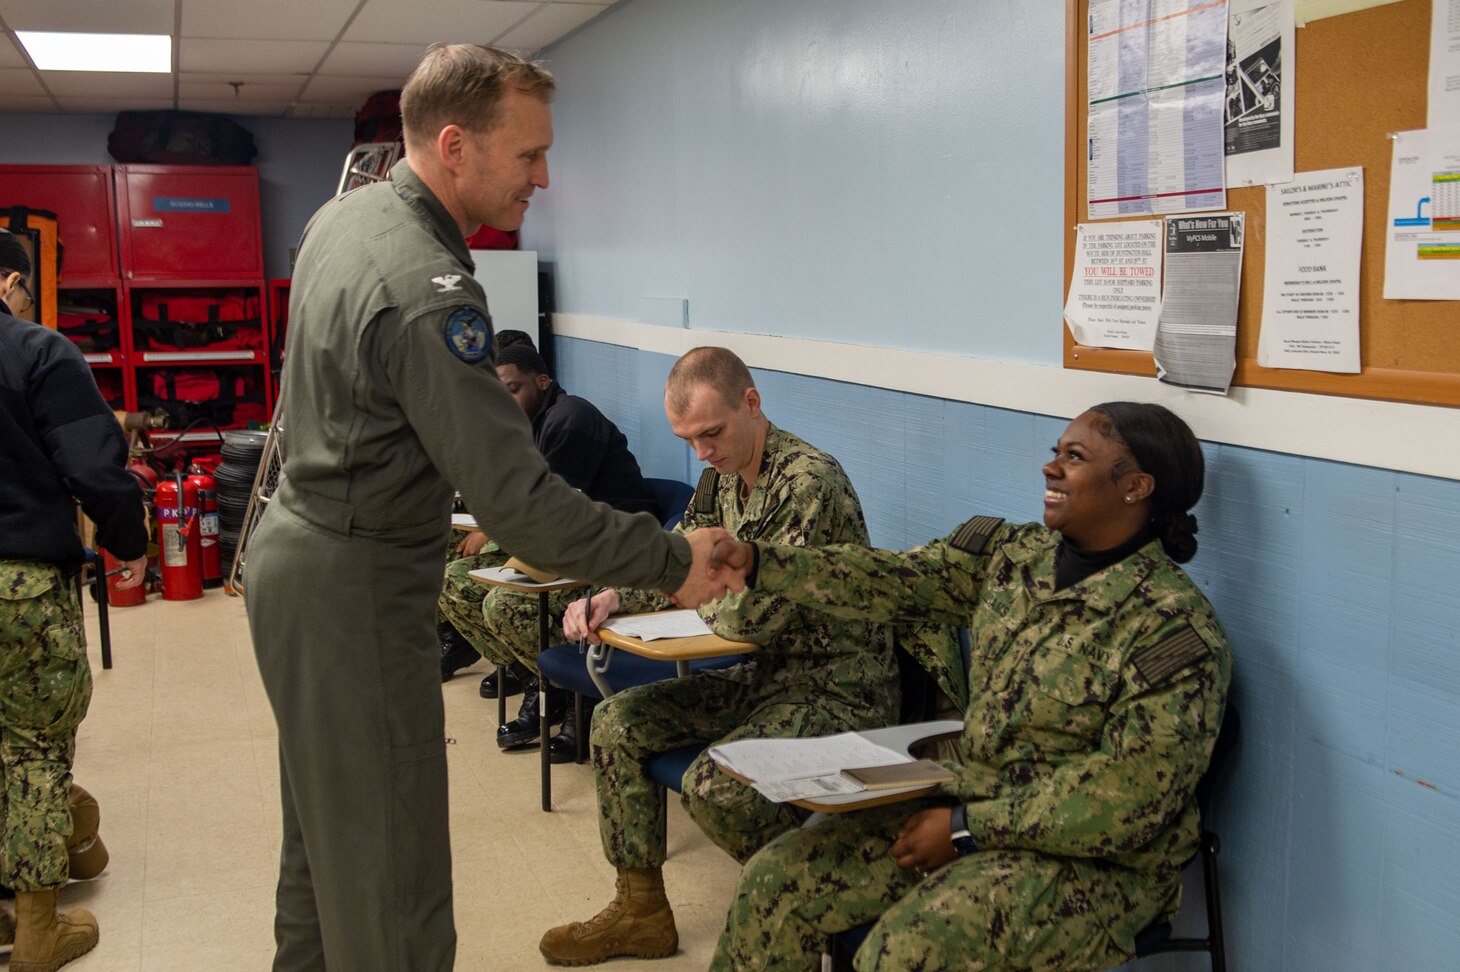 U.S. Navy Capt. Cassidy Norman, commanding officer of the Nimitz-class aircraft carrier USS John C. Stennis (CVN 74), interacts with Aviation Ordnanceman 3rd Class Jamari Denning, from Killeen, Texas, with new Sailors during a School of Ship a visit at Huntington Hall, Hampton Virginia, Feb. 14, 2023. The John C. Stennis is in Newport News Shipyard conducting Refueling and Complex Overhaul to prepare the ship for the second half of its 50-year service life.